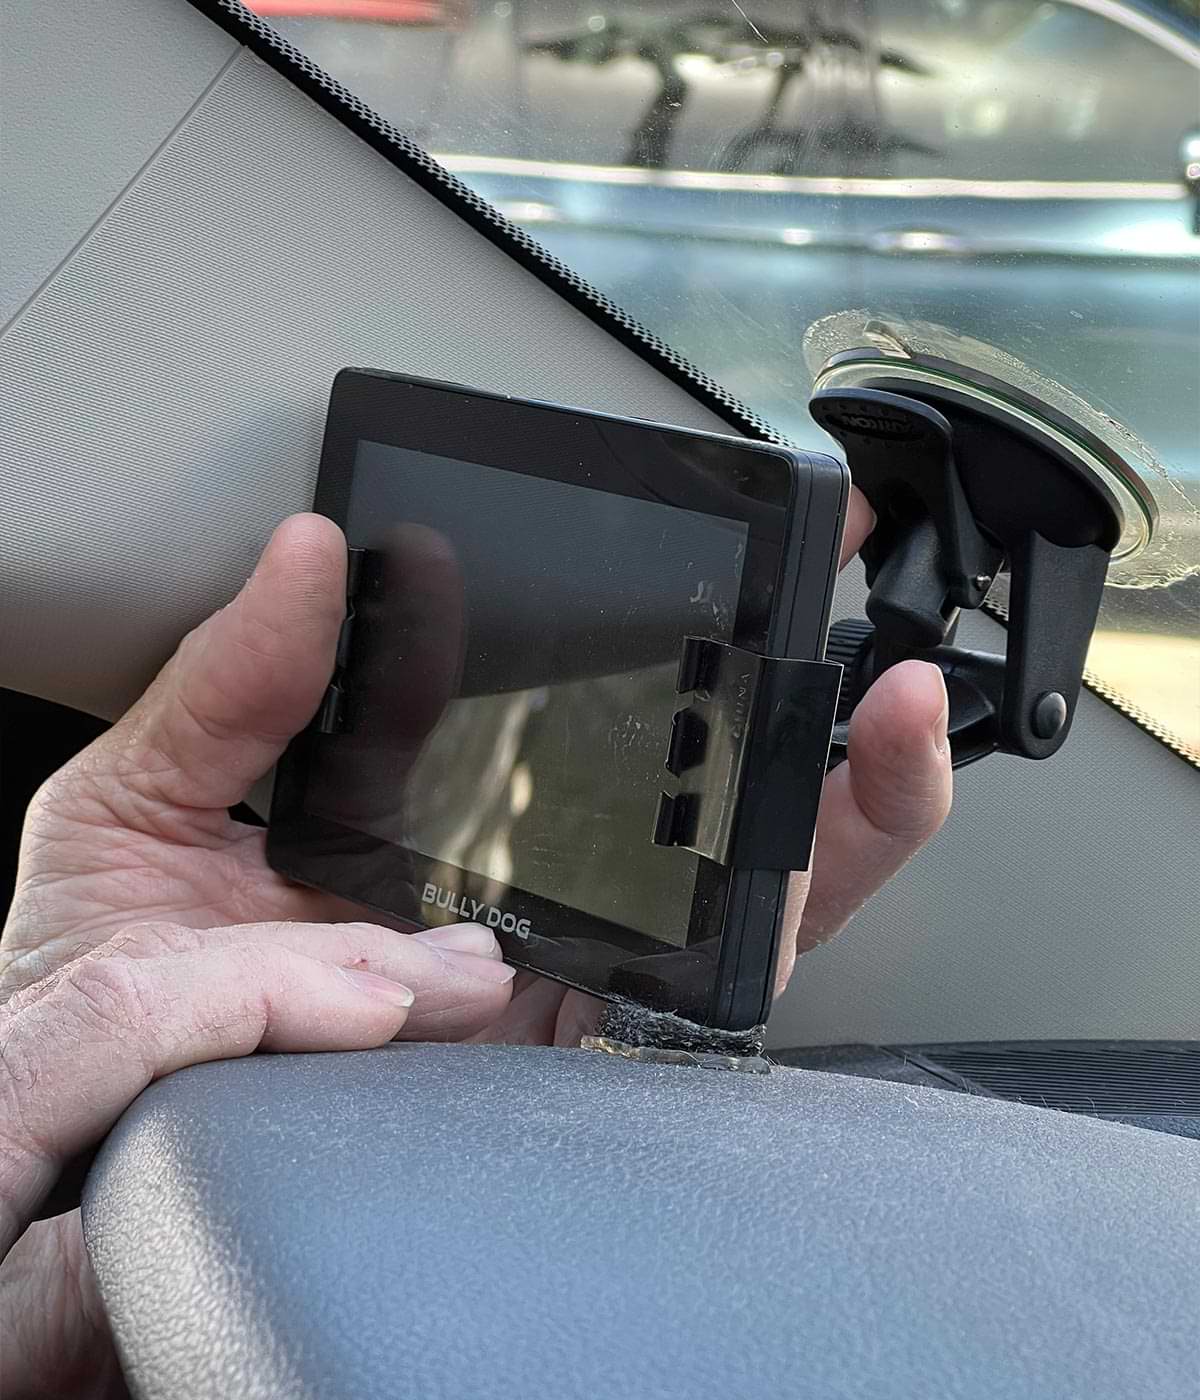 the monitor is adjusted while the suction-cup is attached to the windshield